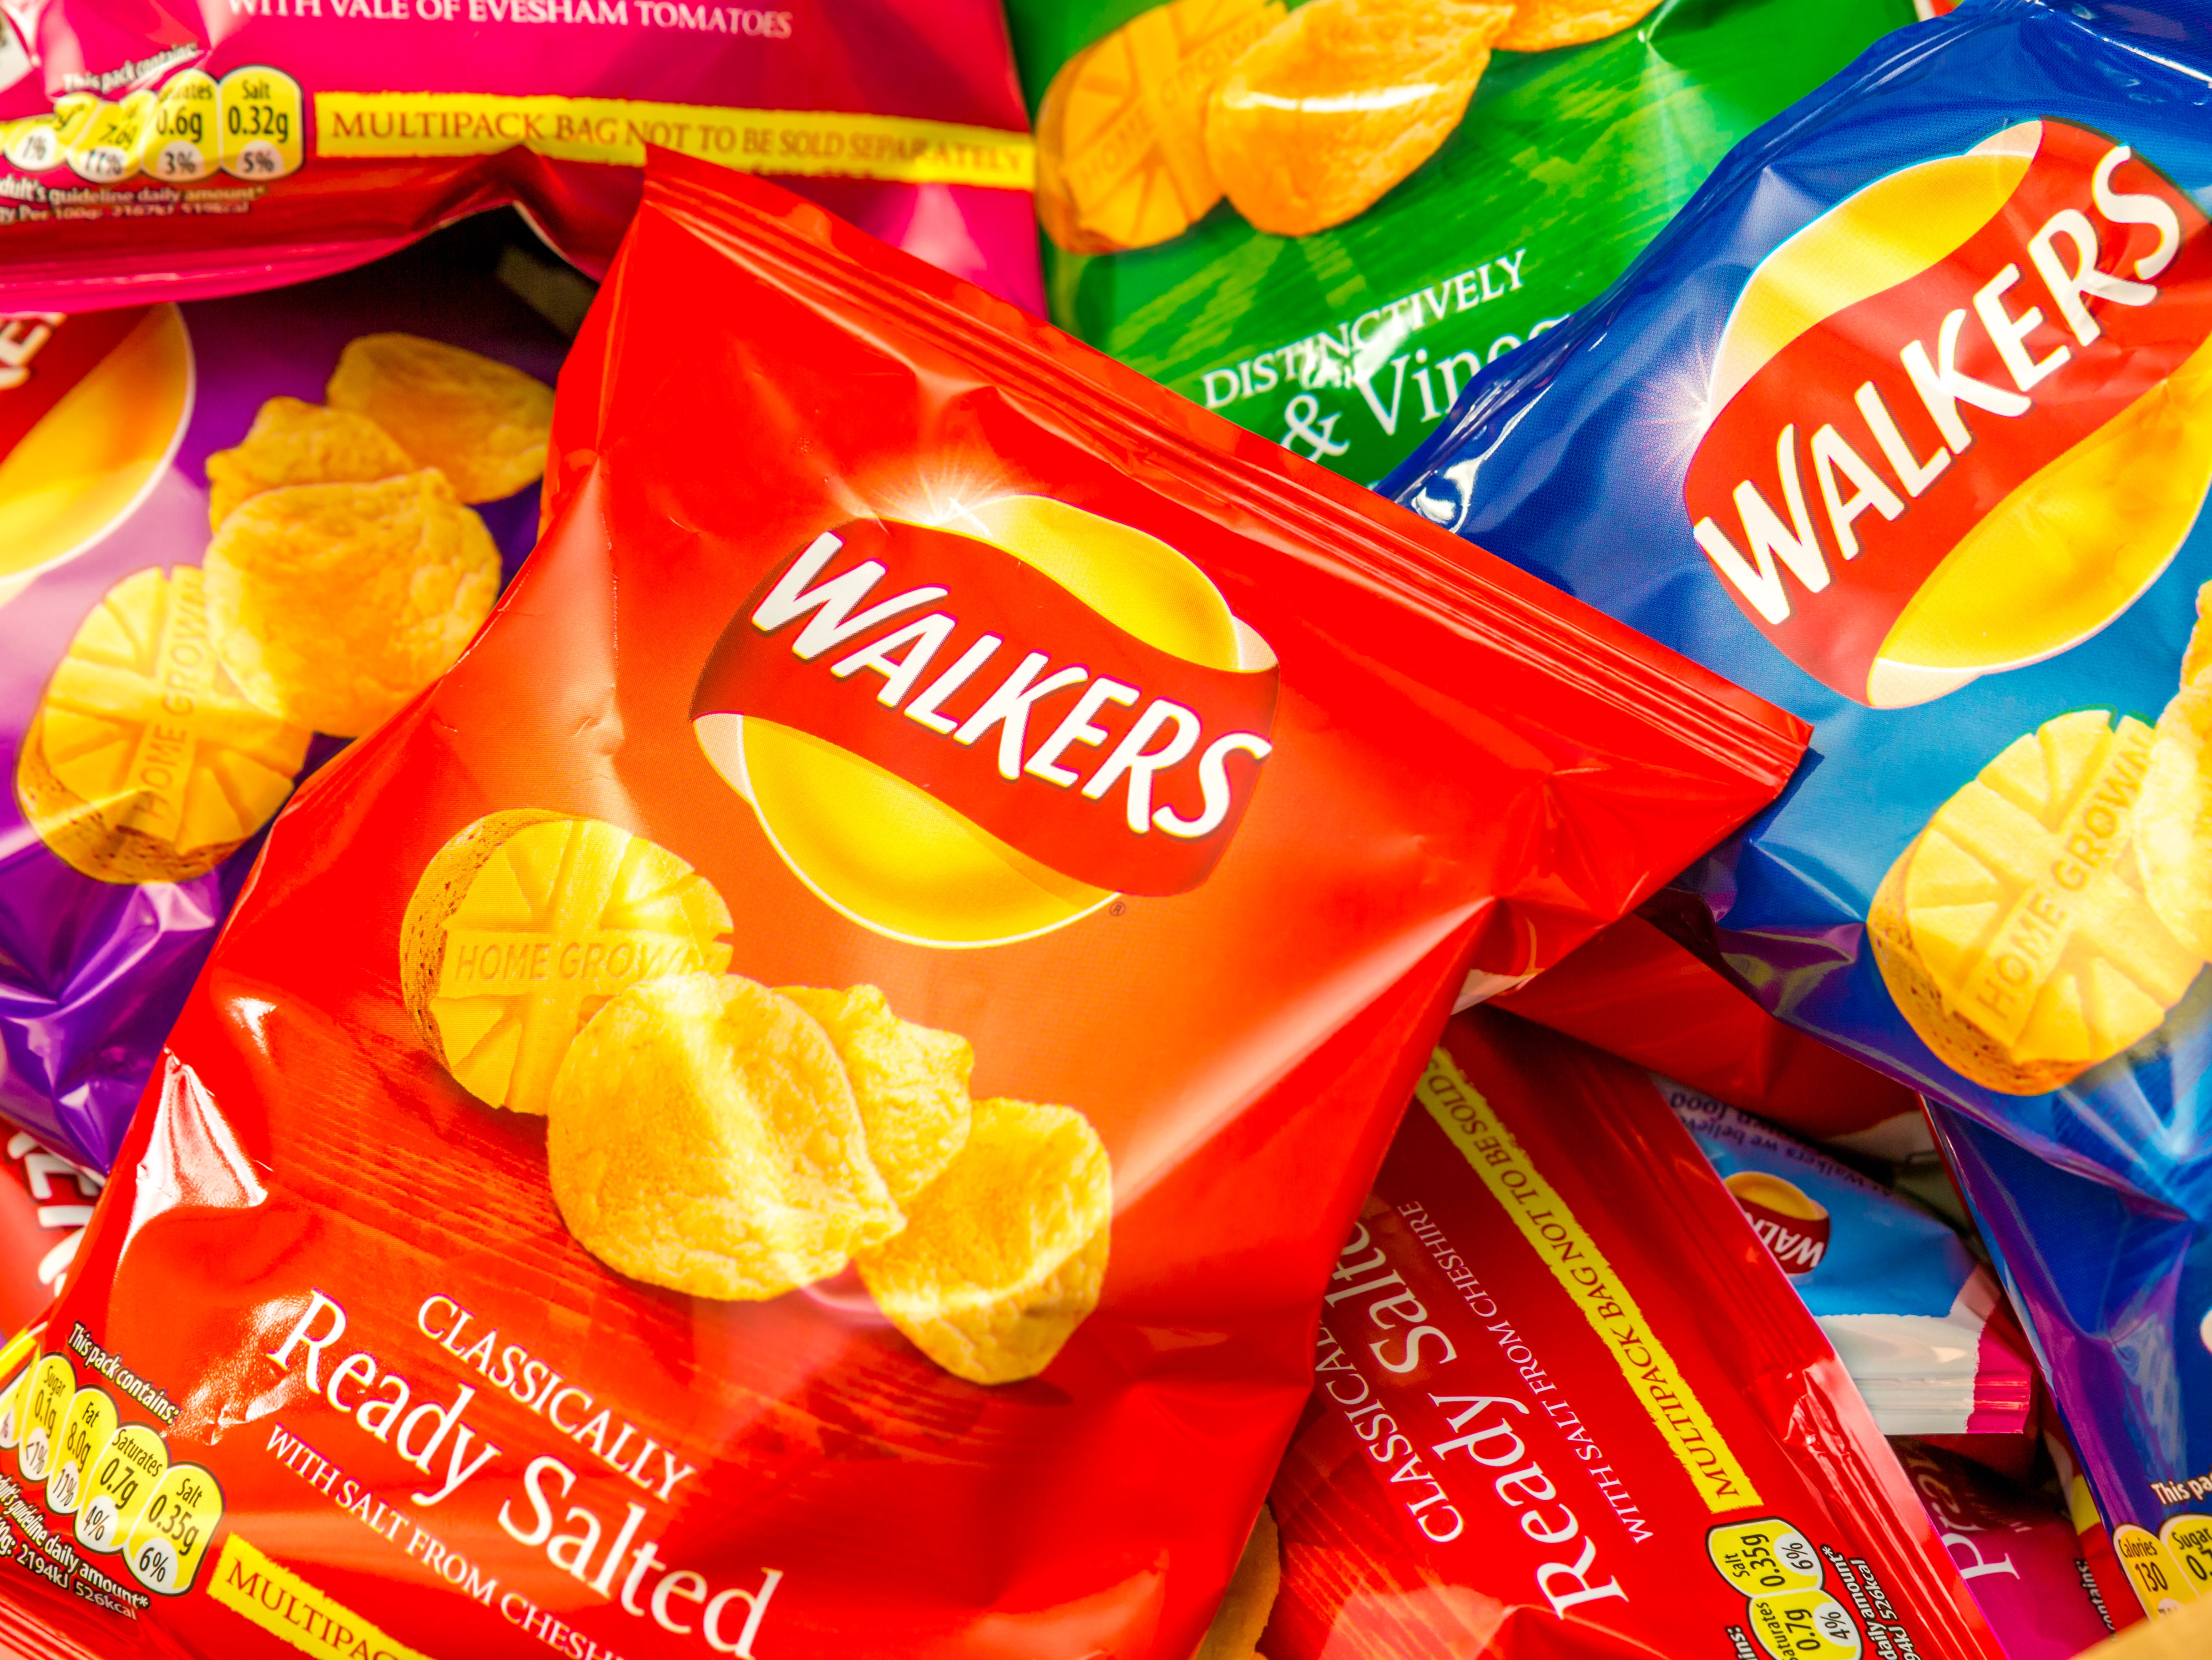 Walkers is experiencing shortages following an IT glitch